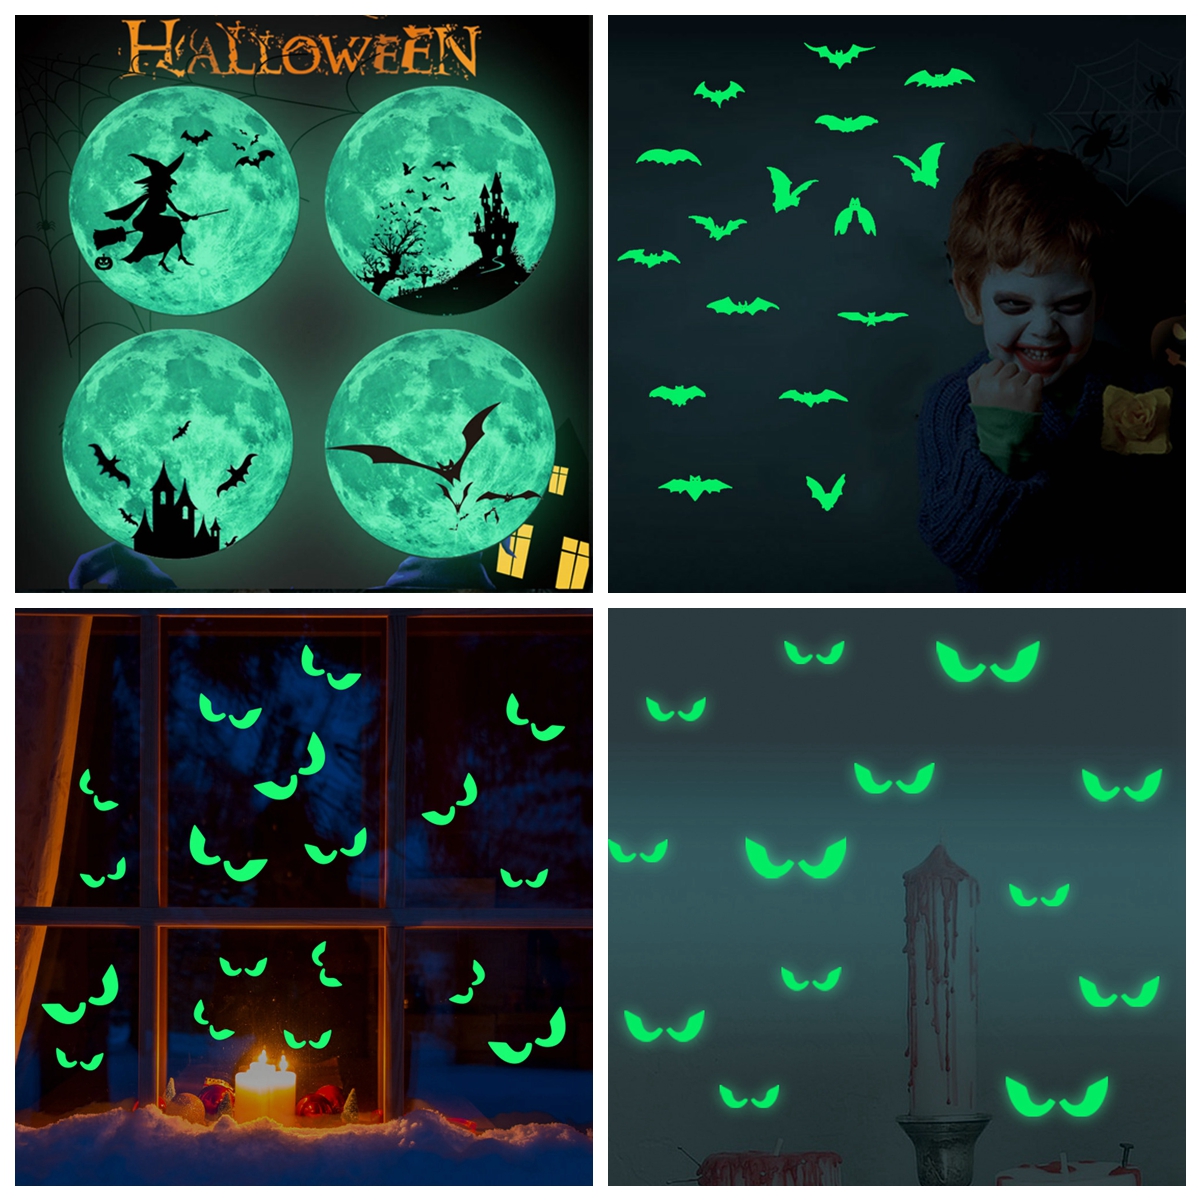 Halloween-Moon-Bat-Glow-In-Dark-Wall-Sticker-Luminous-Removable-Party-Room-Decorations-1585181-3